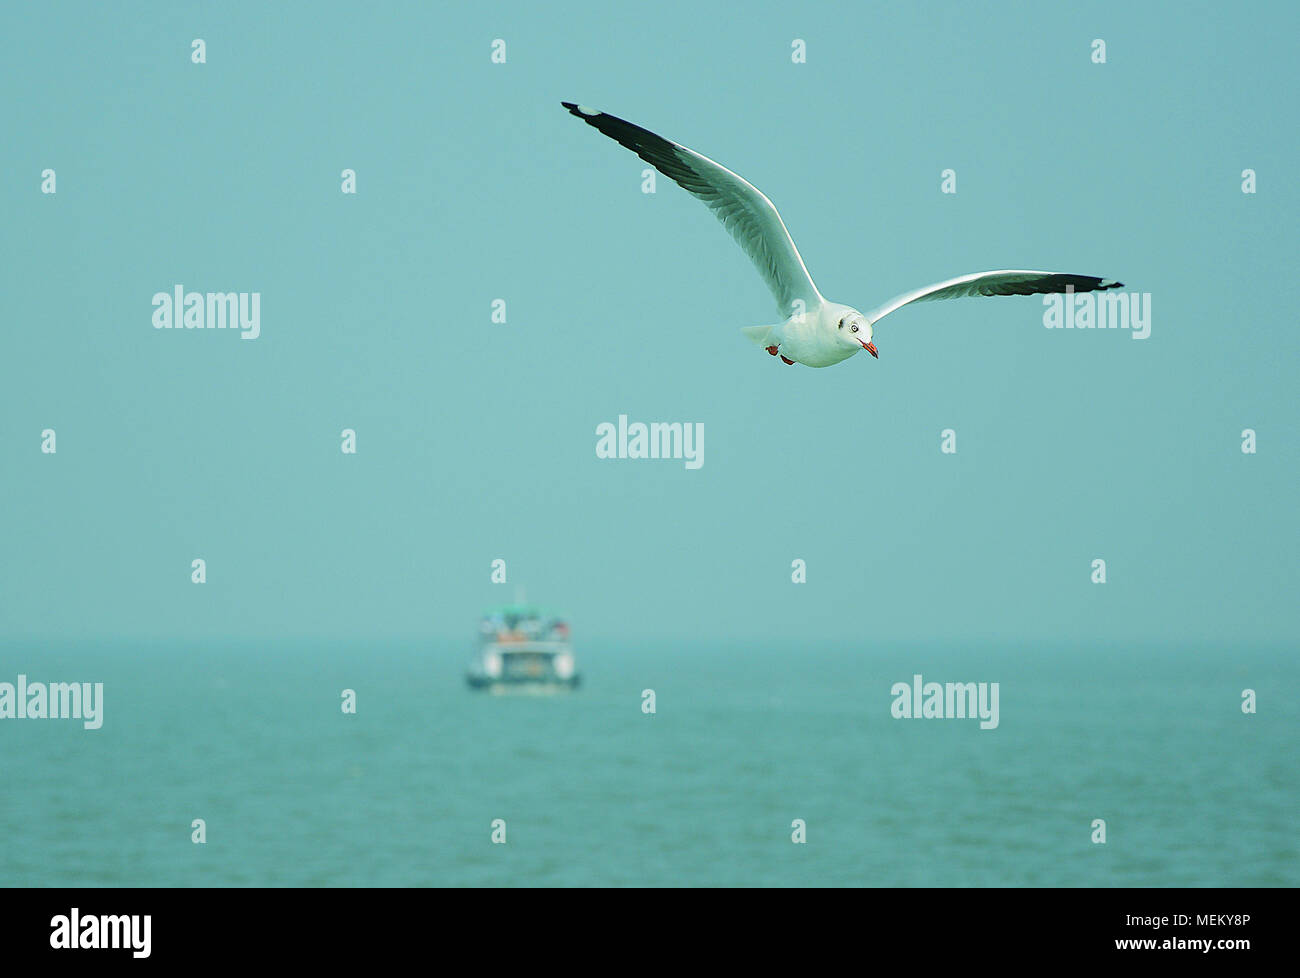 Sea gull gliding over the sea with a boat in the background, Mumbai, India Stock Photo